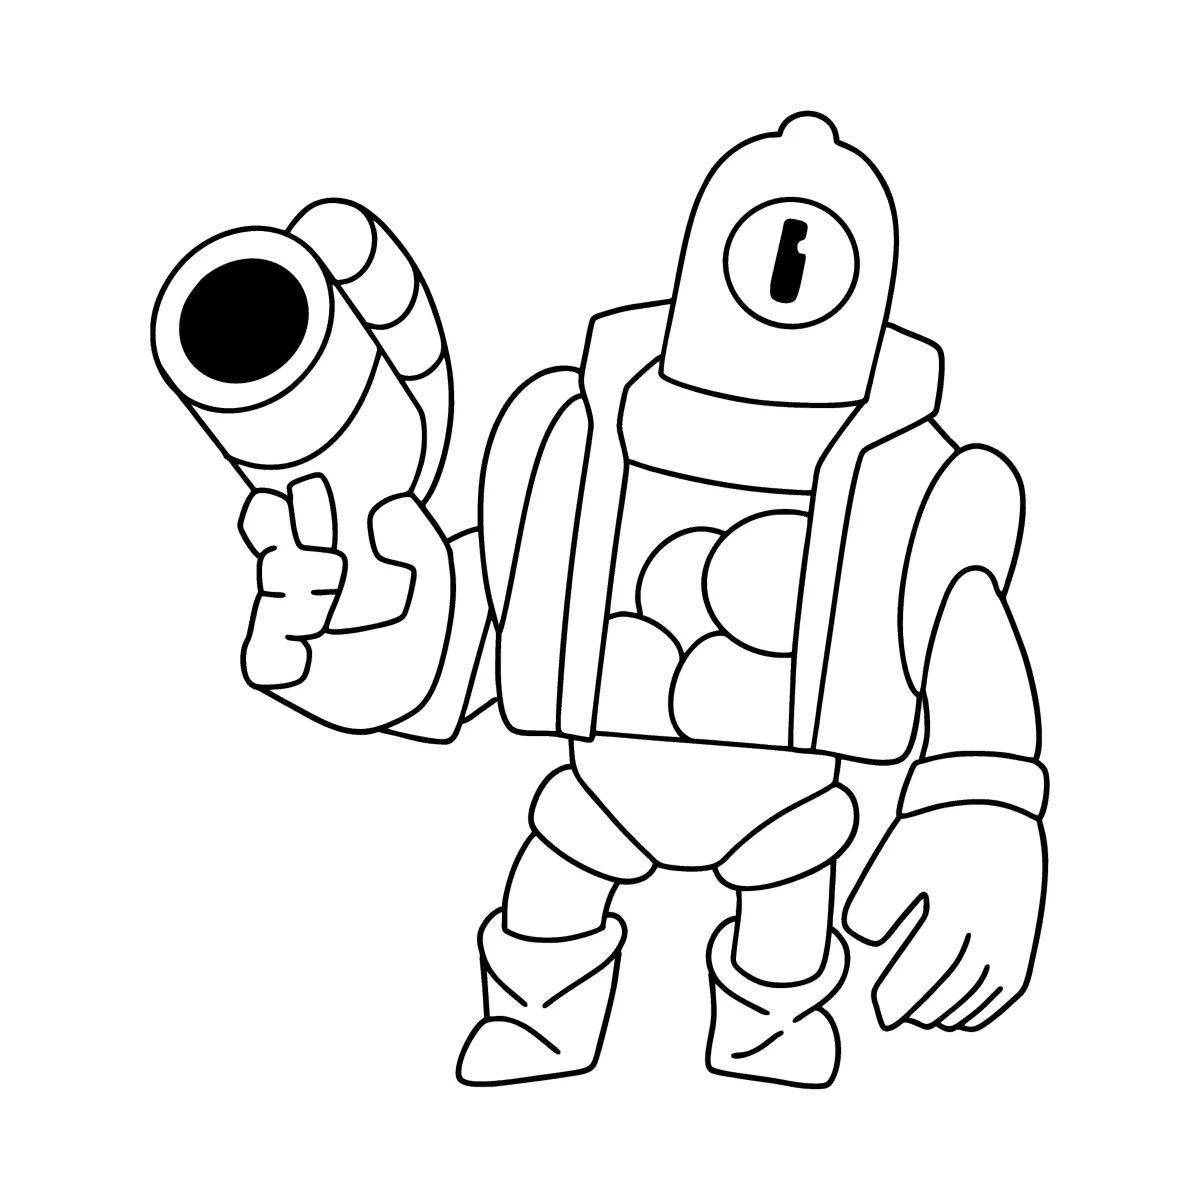 Major rico from bravo stars coloring page